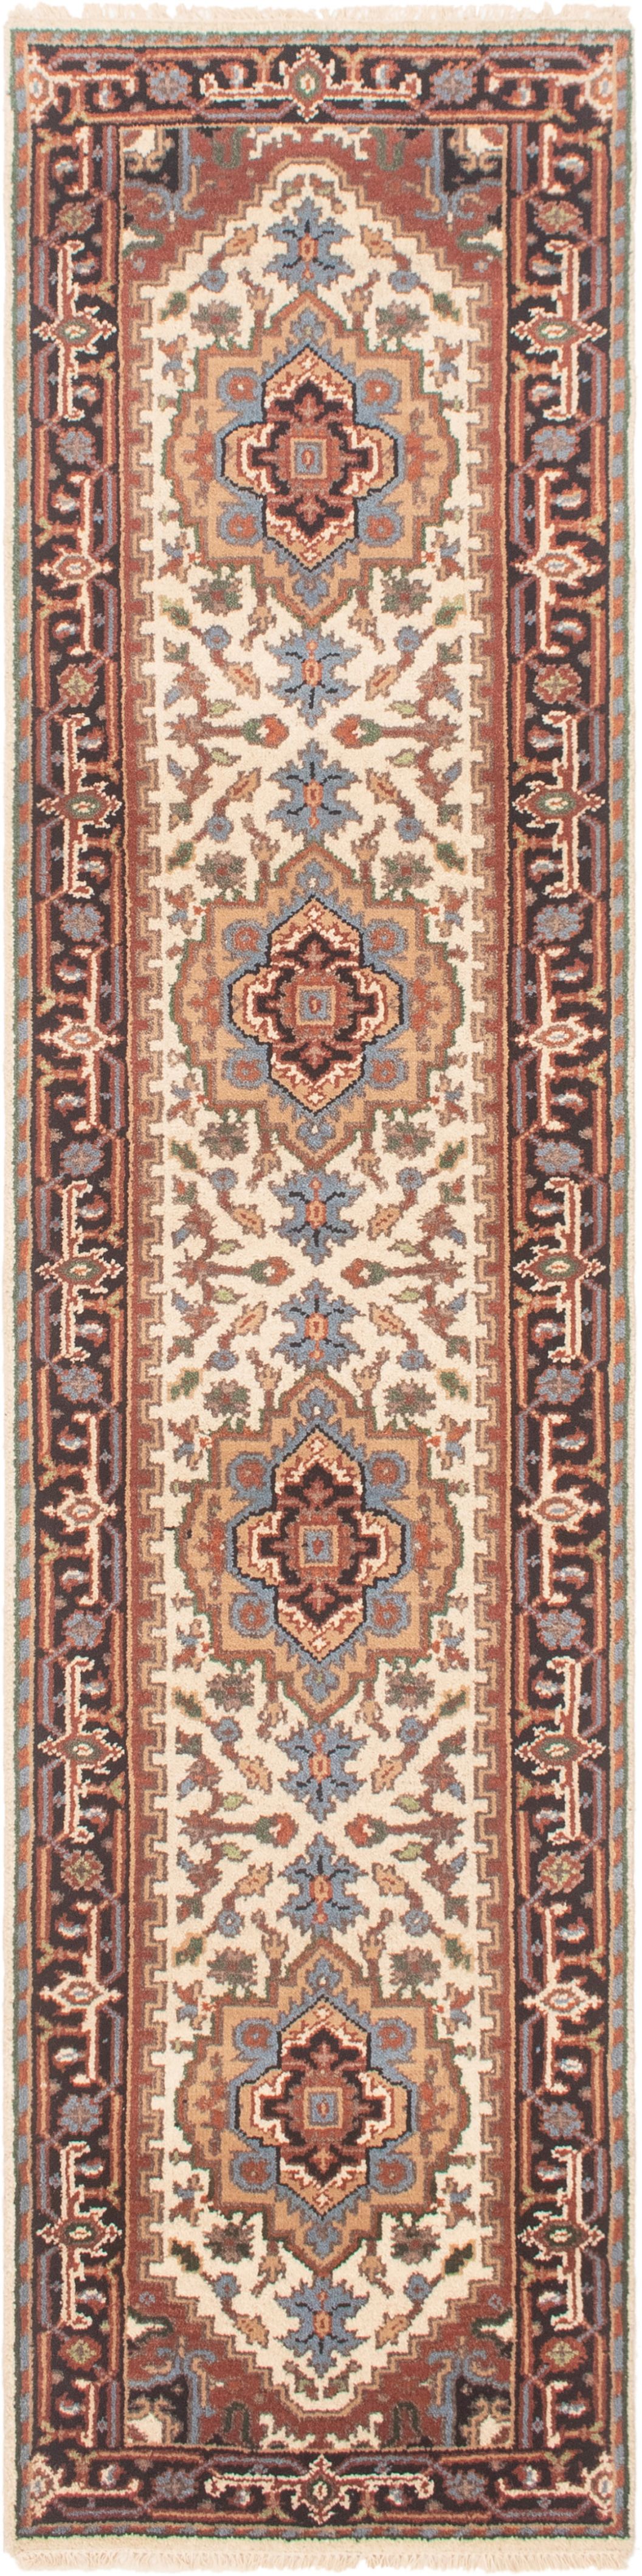 Hand-knotted Serapi Heritage Cream Wool Rug 2'6" x 10'3" Size: 2'6" x 10'3"  